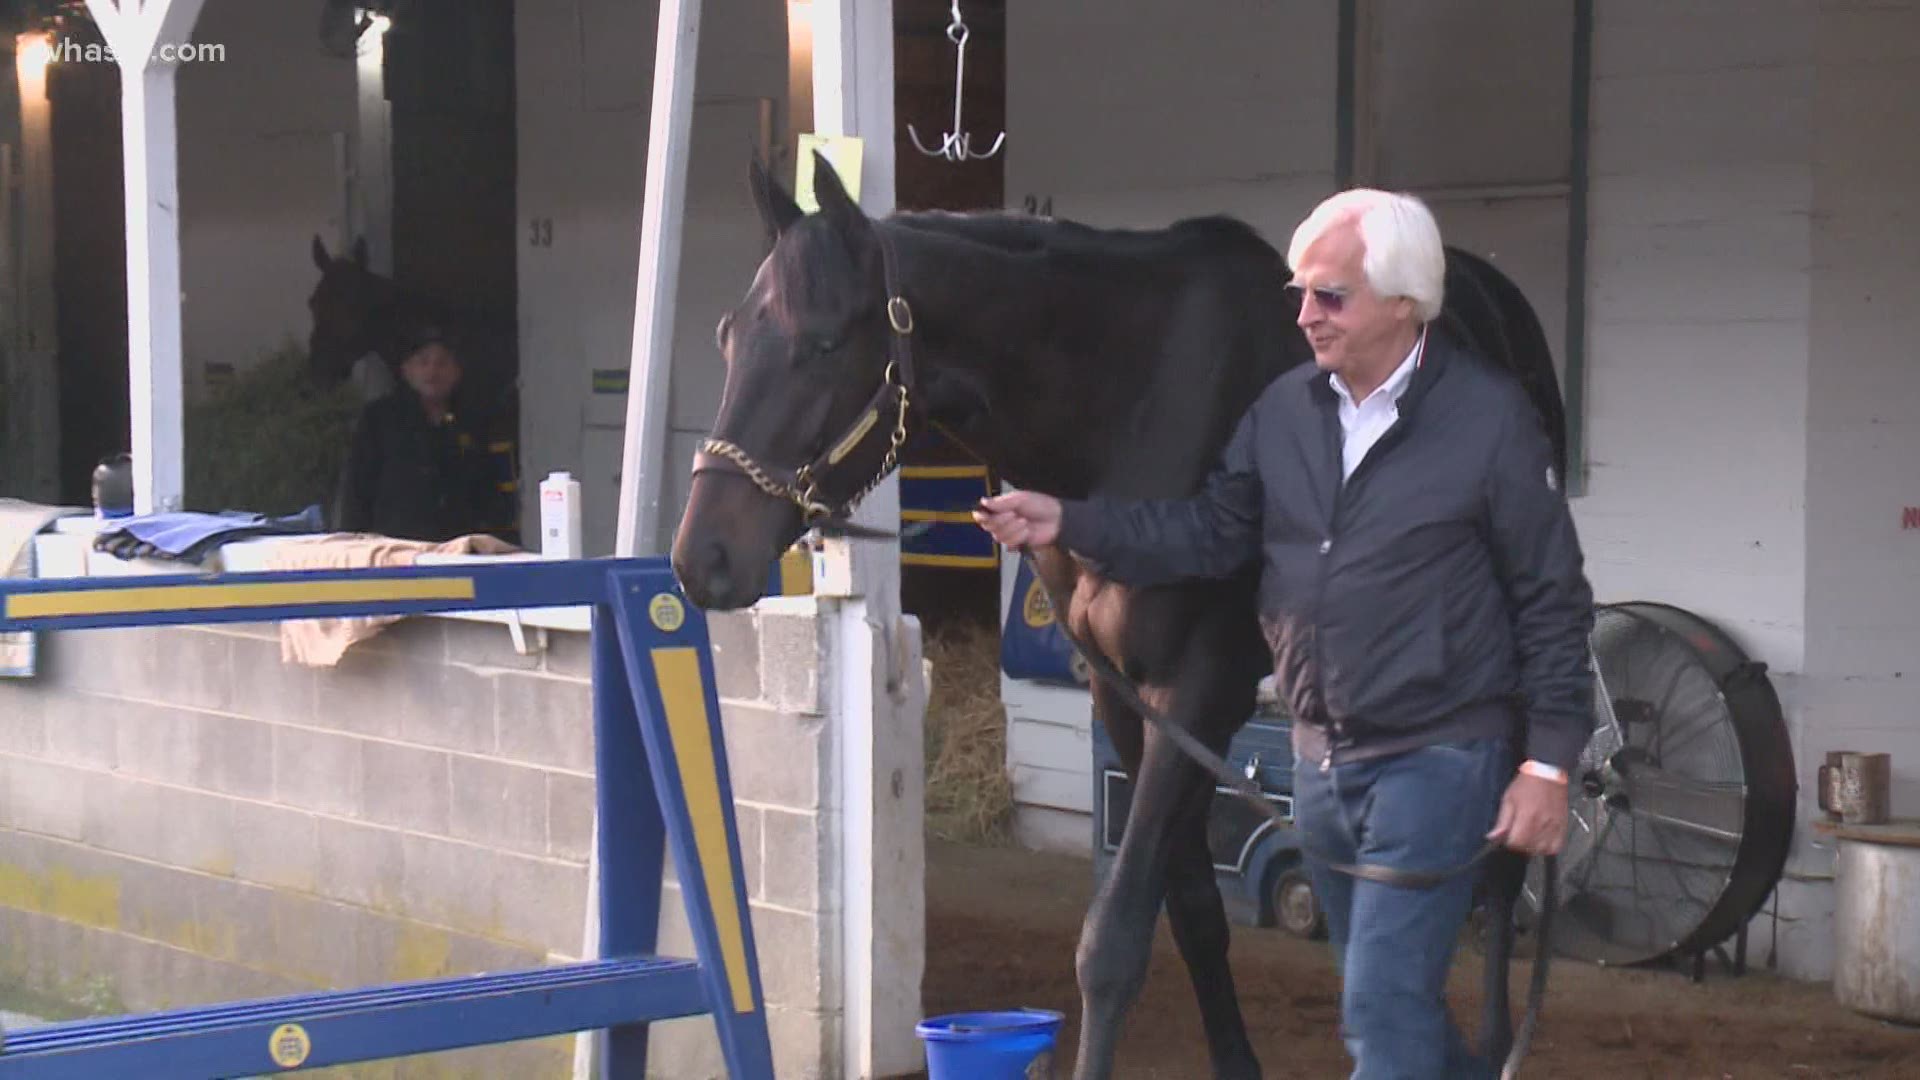 Medina Spirit’s surprising Kentucky Derby victory gave Bob Baffert a good problem to have — figuring out where to hang another sign on his barn’s wall.